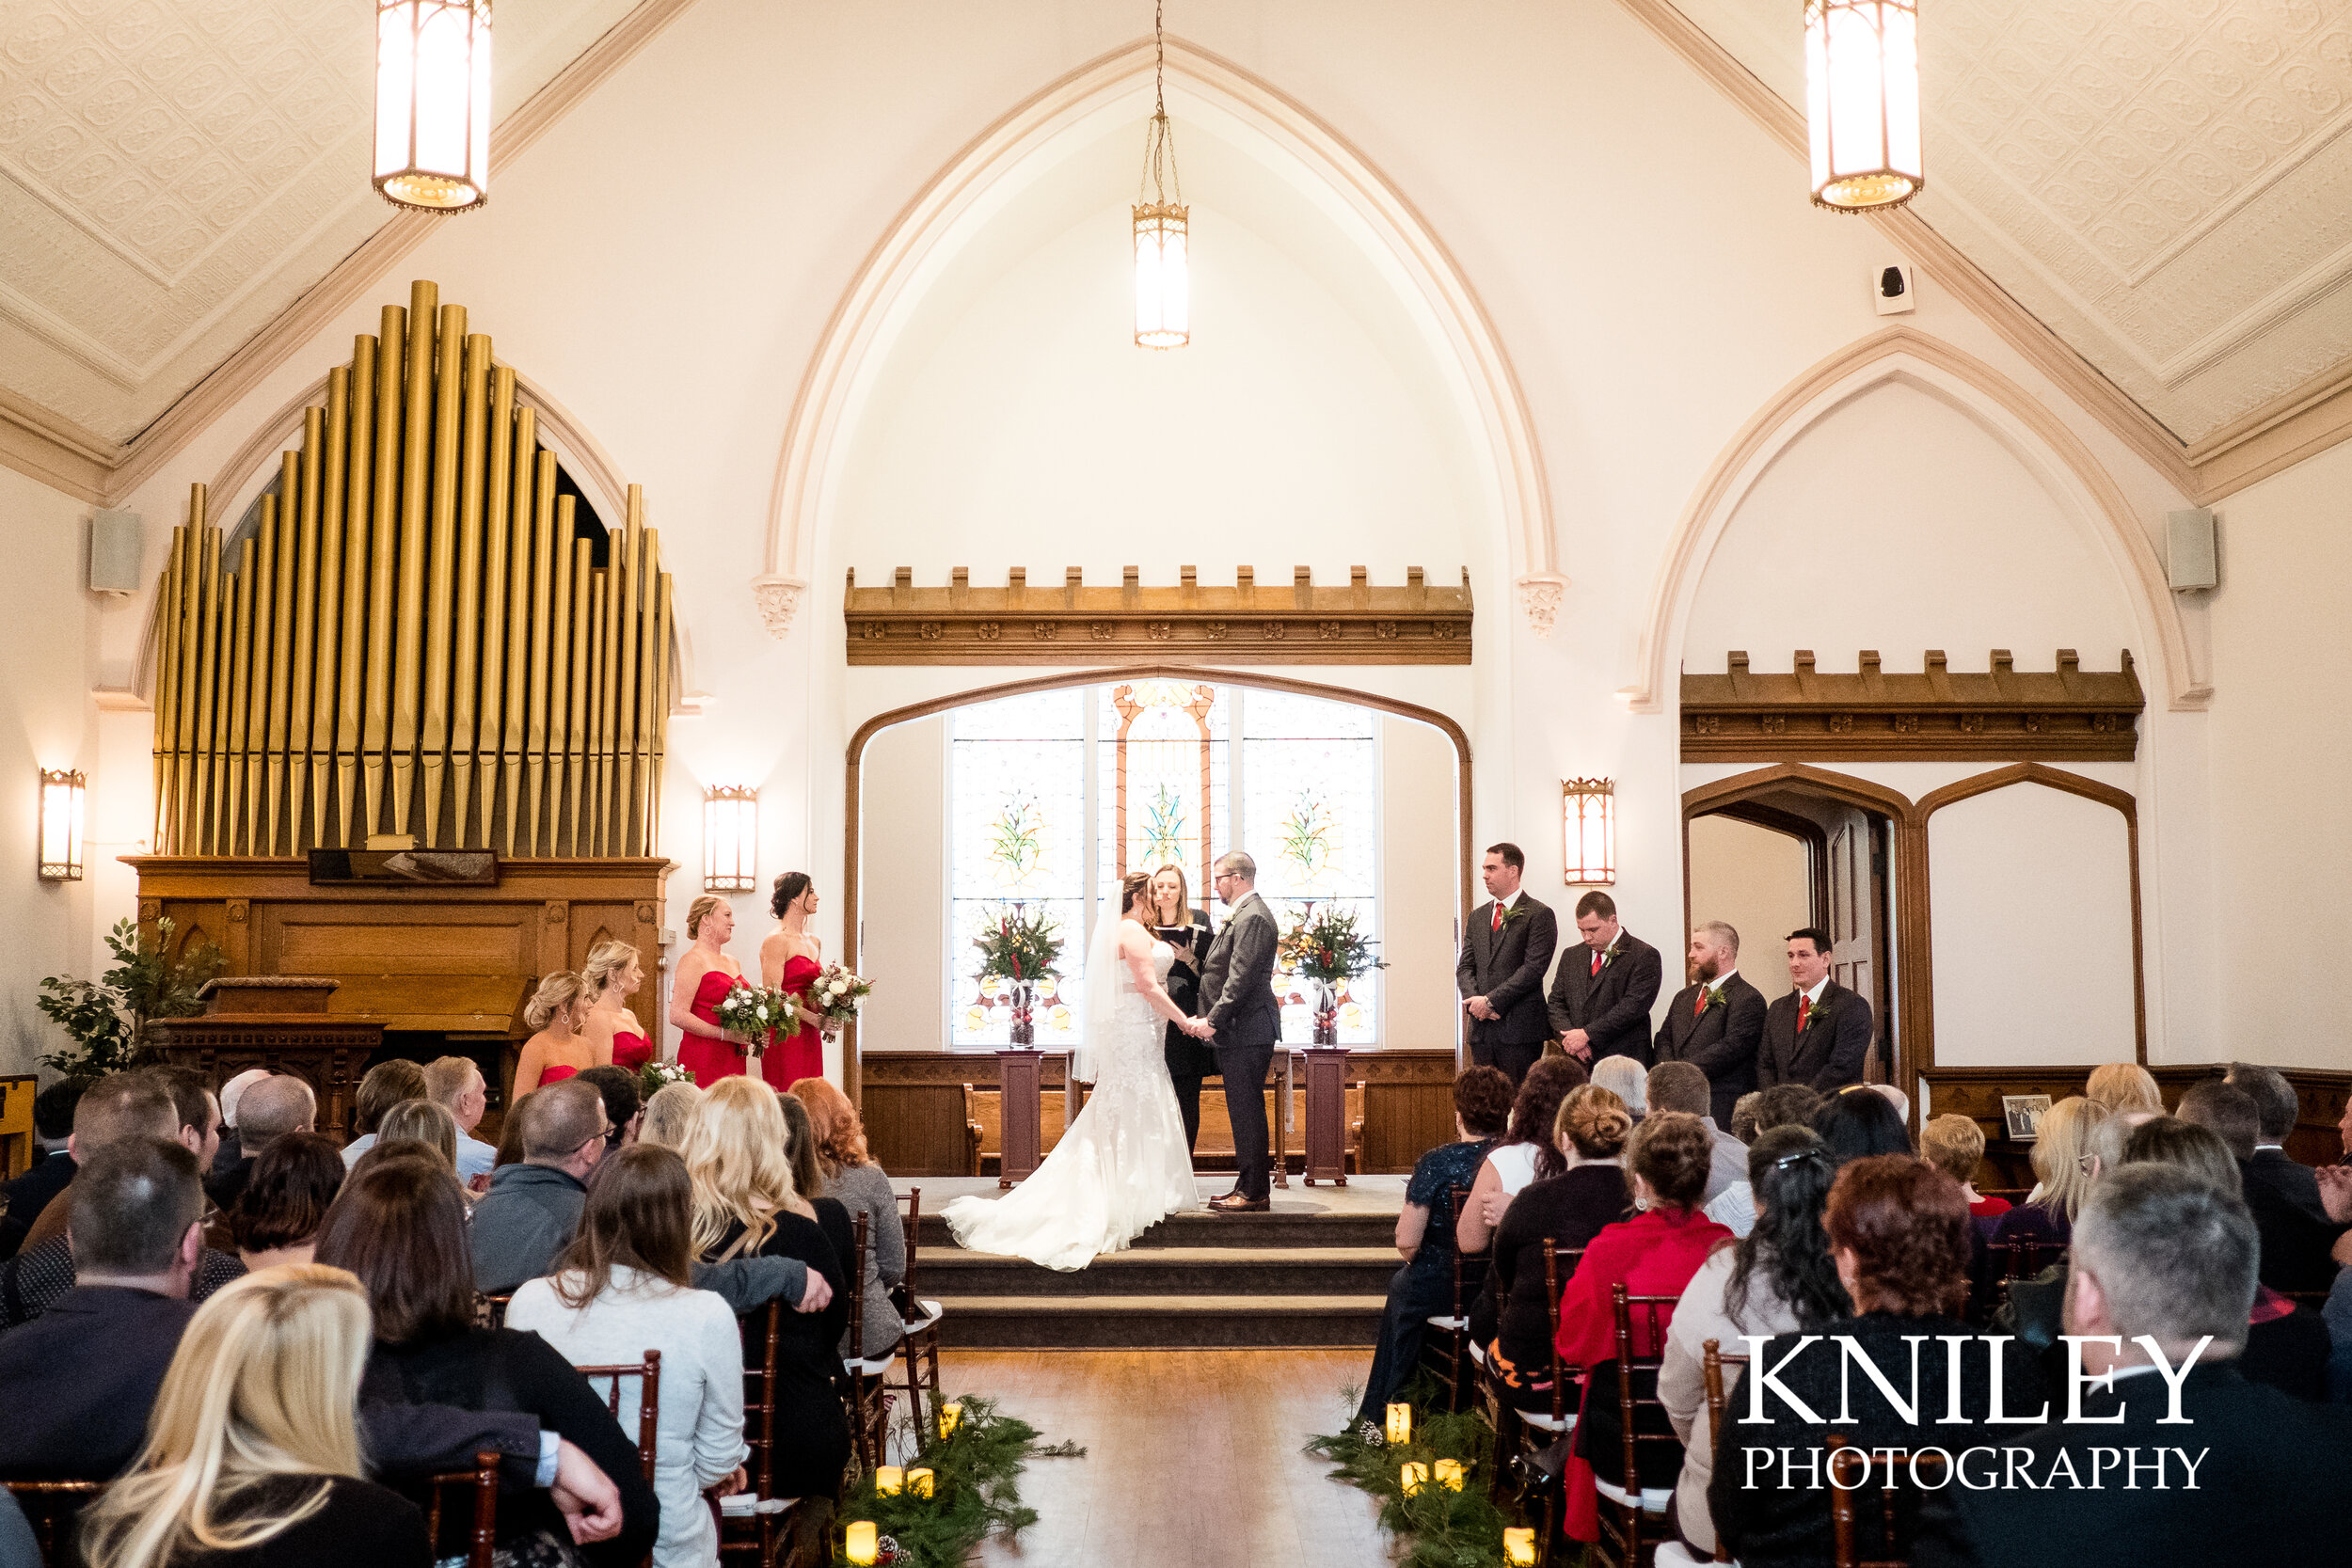 010-Kniley-Photography-Westminster-Chapel-Wedding-Venue-Picture-7890.jpg